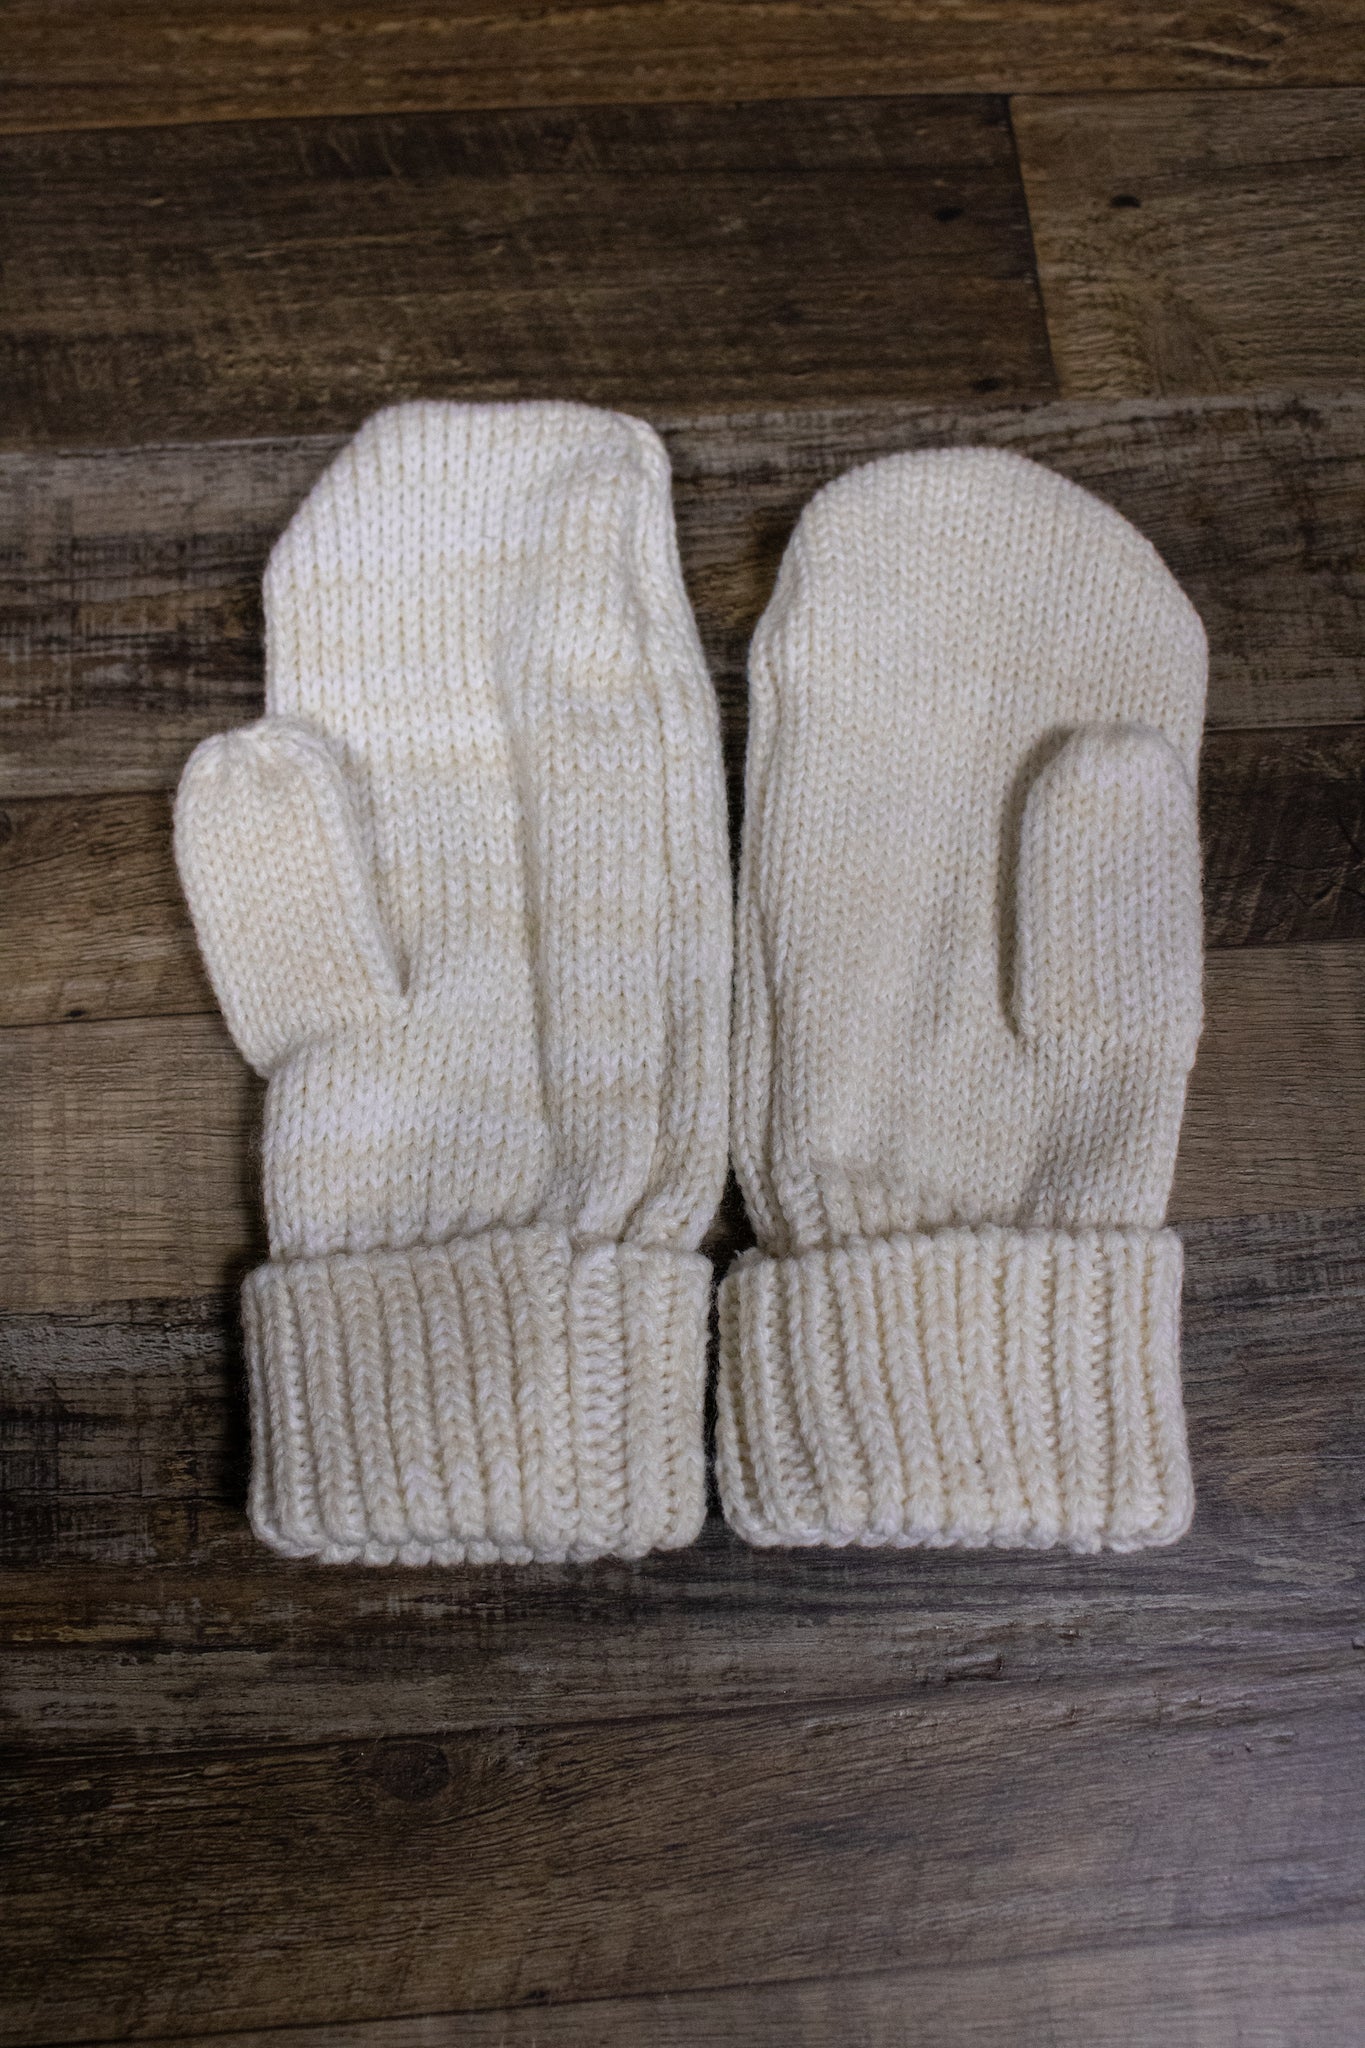 Philadelphia Eagles Meeko cuff mittens are cream and white in color and have a knit cuff and an embroidered Eagle logo on the back of the mitten